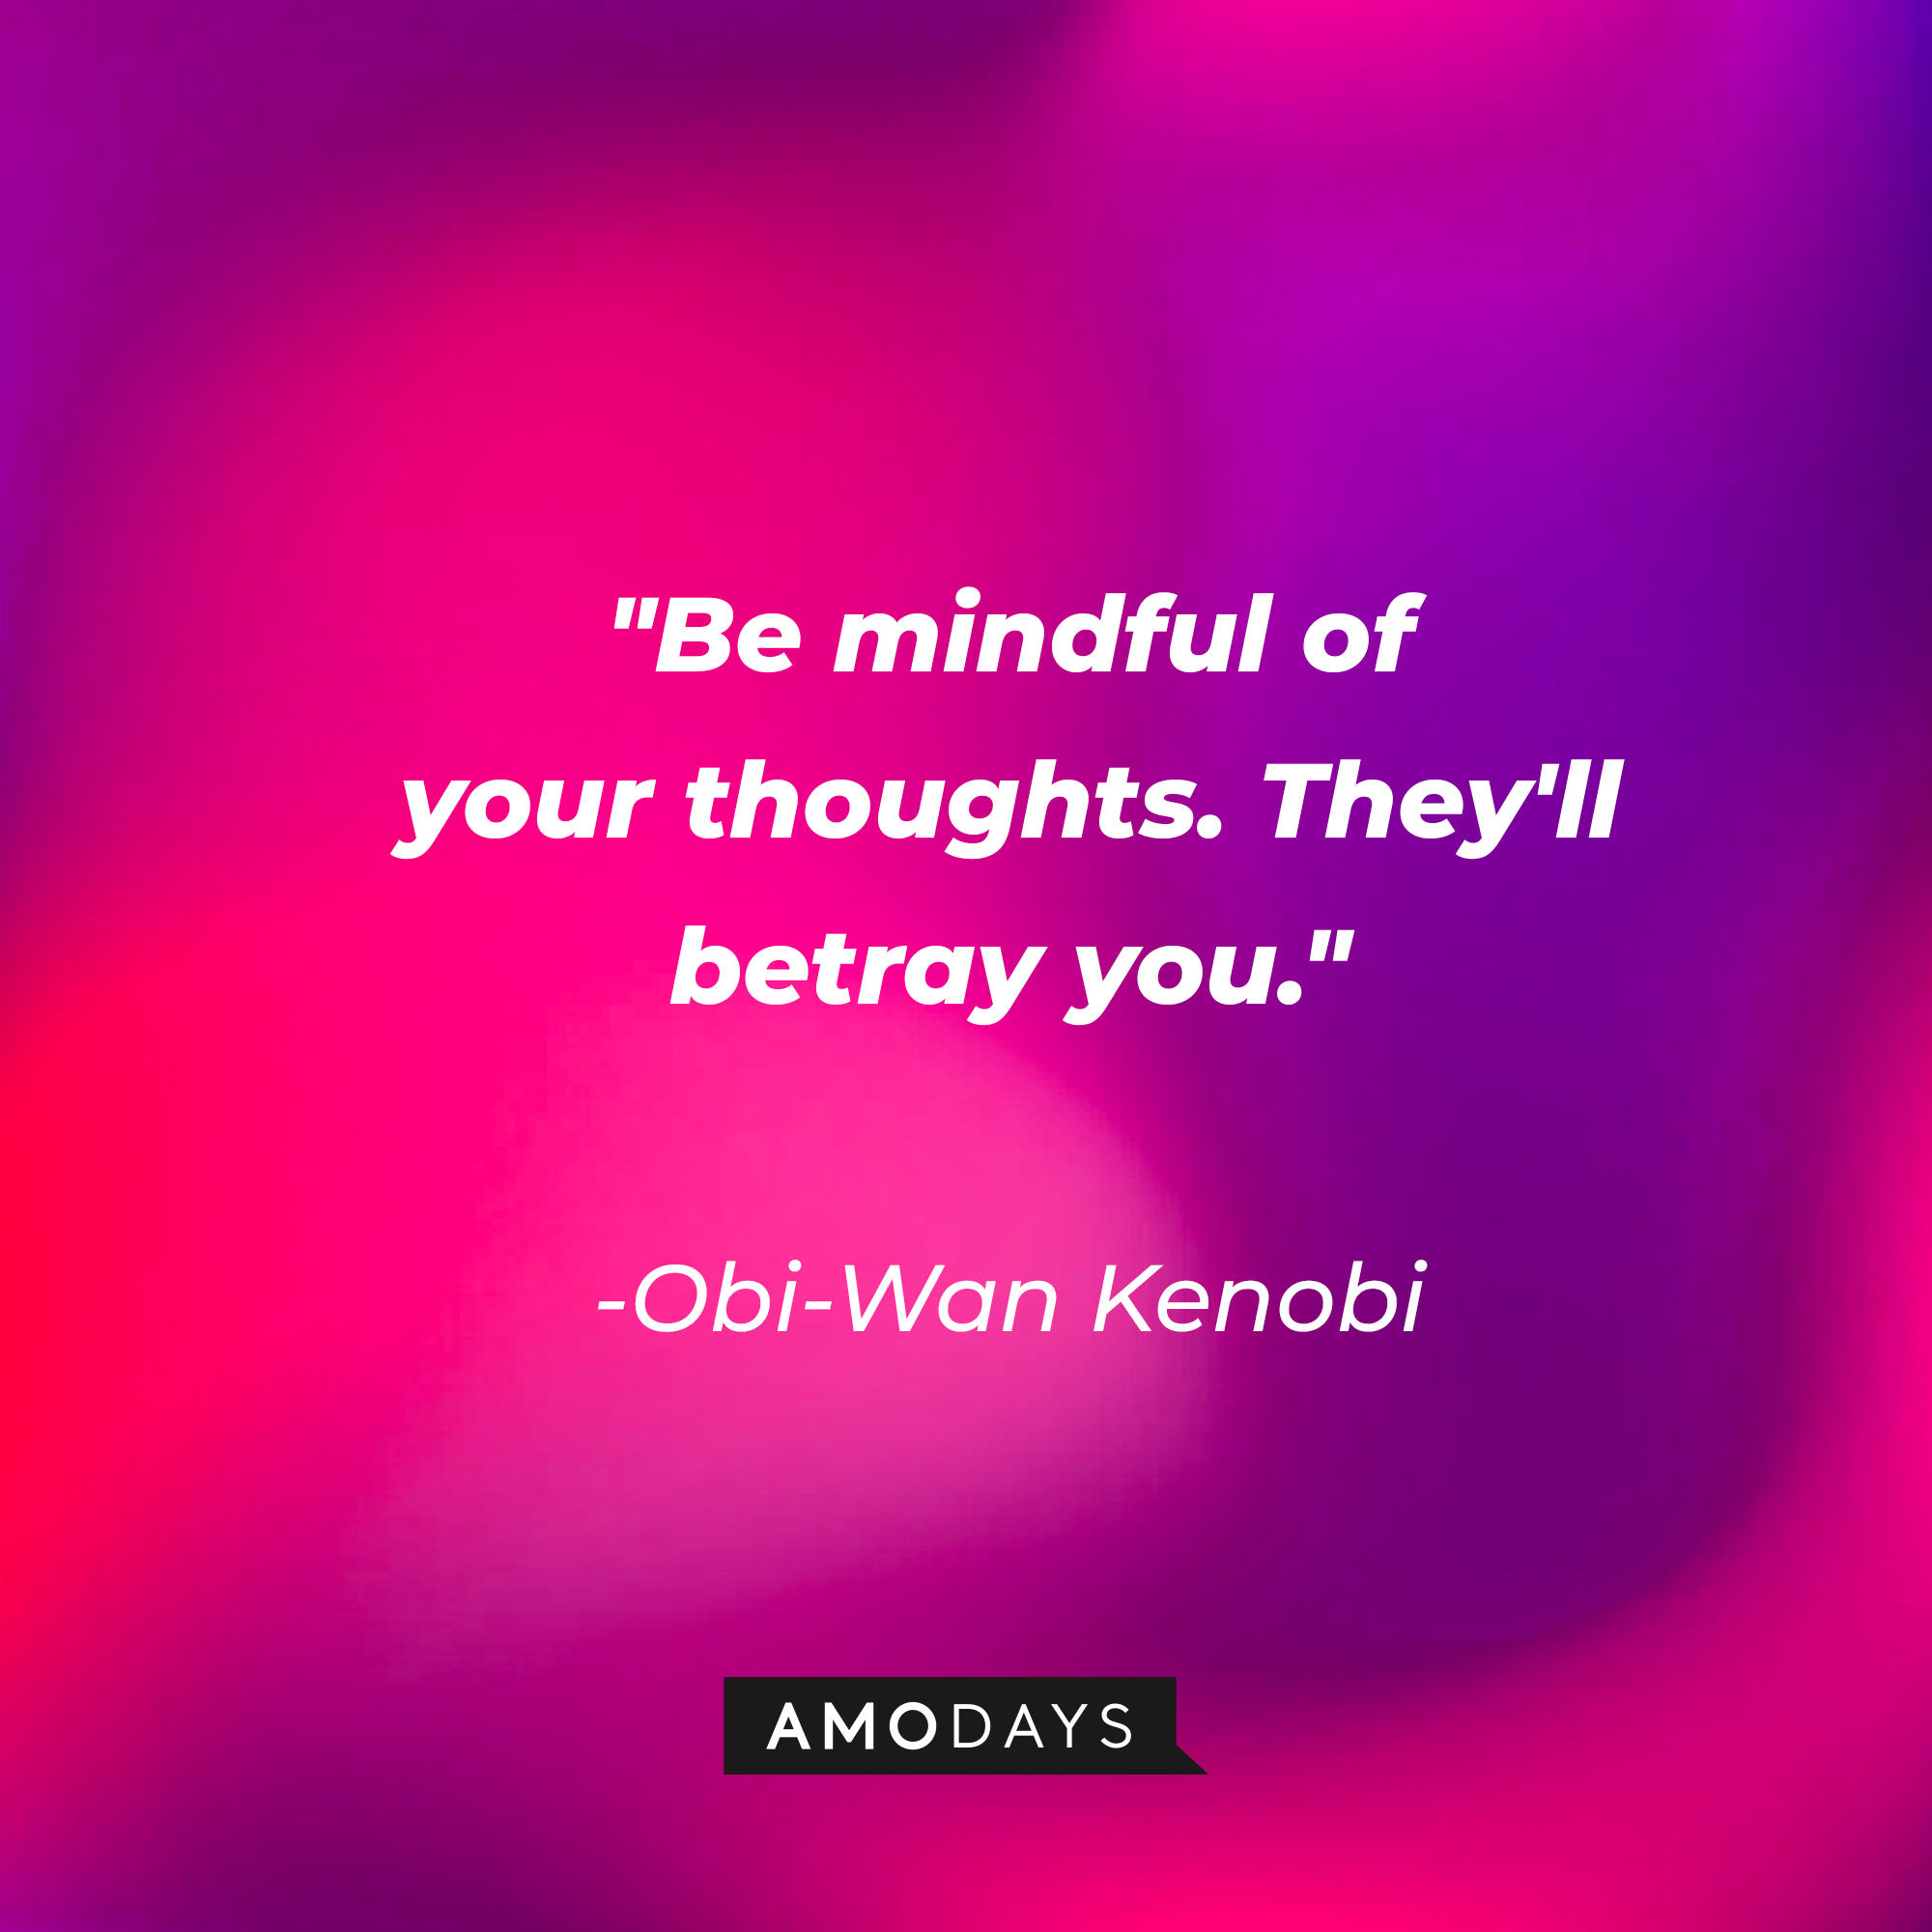 Obi-Wan Kenobi's quote: "Be mindful of your thoughts. They'll betray you." | Source: AmoDays